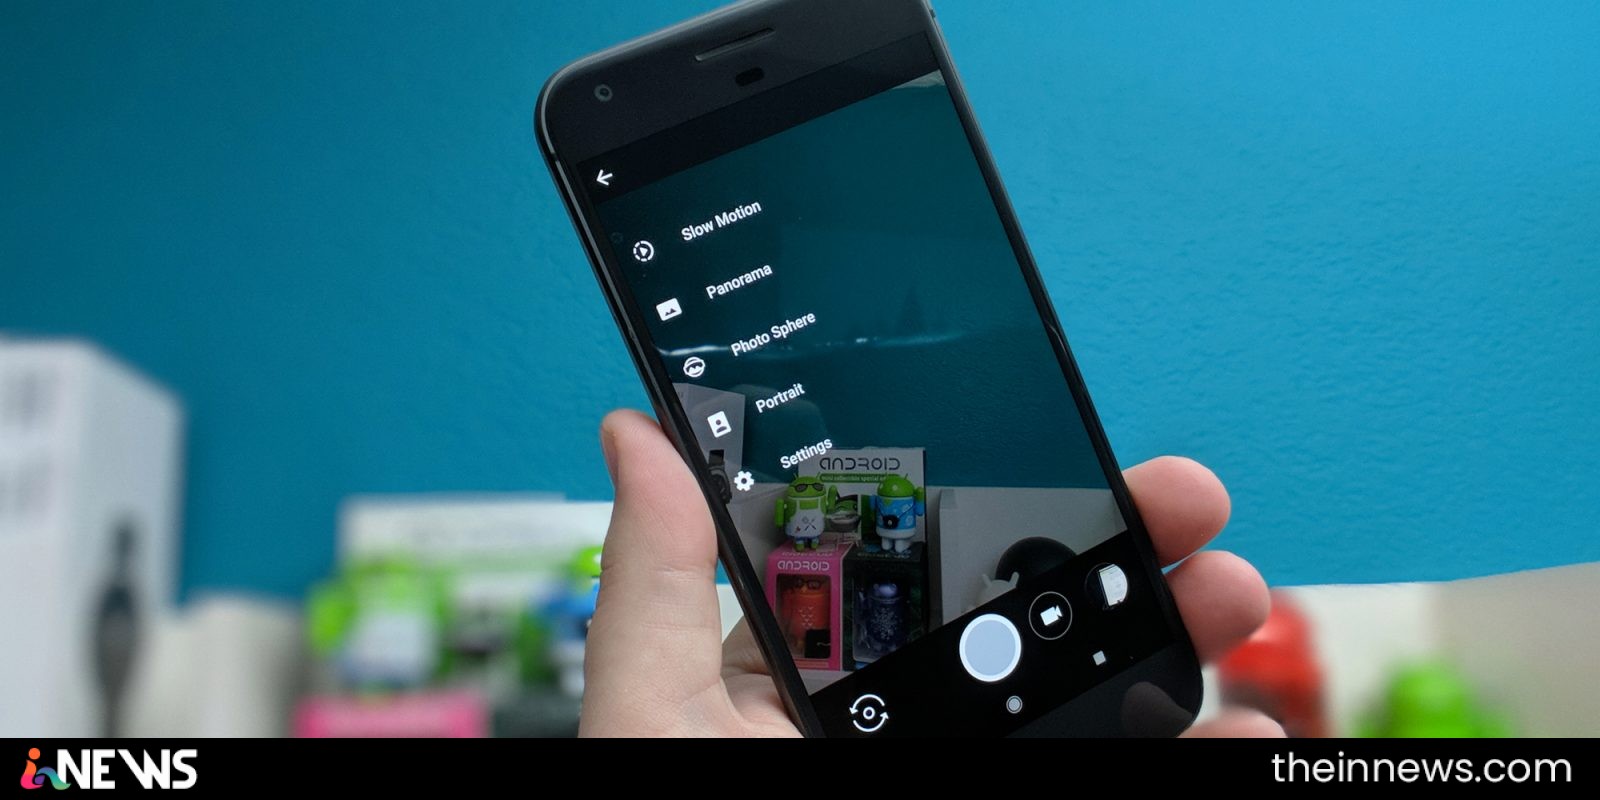 How to Install A Google Camera Mod on Any Android Phone